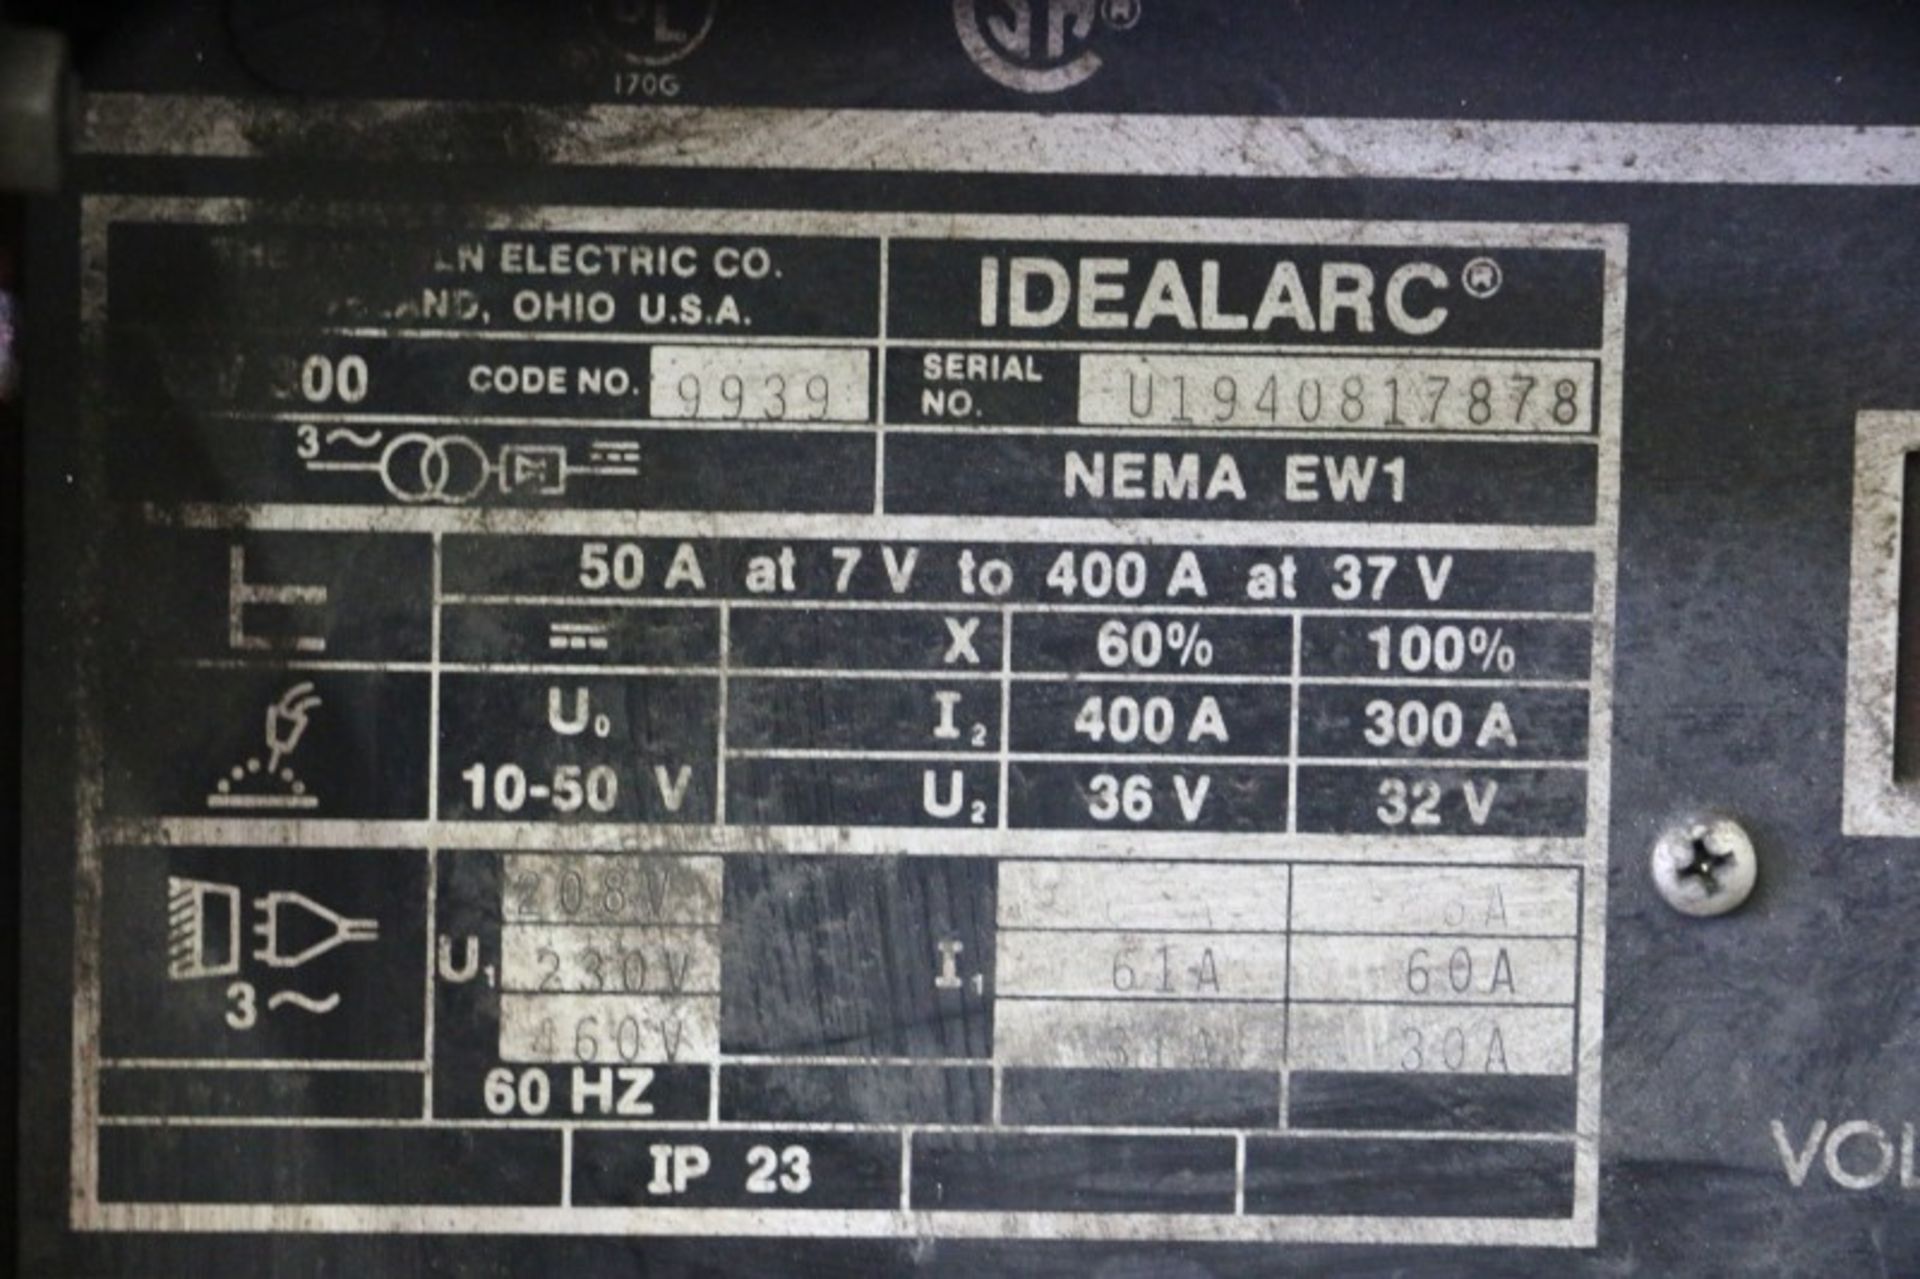 Lincoln Electric Idealarc CV-300 Arc Welder S/N U1940817878 with Lincoln Electric LN-7 Wire Feeder - Image 4 of 5